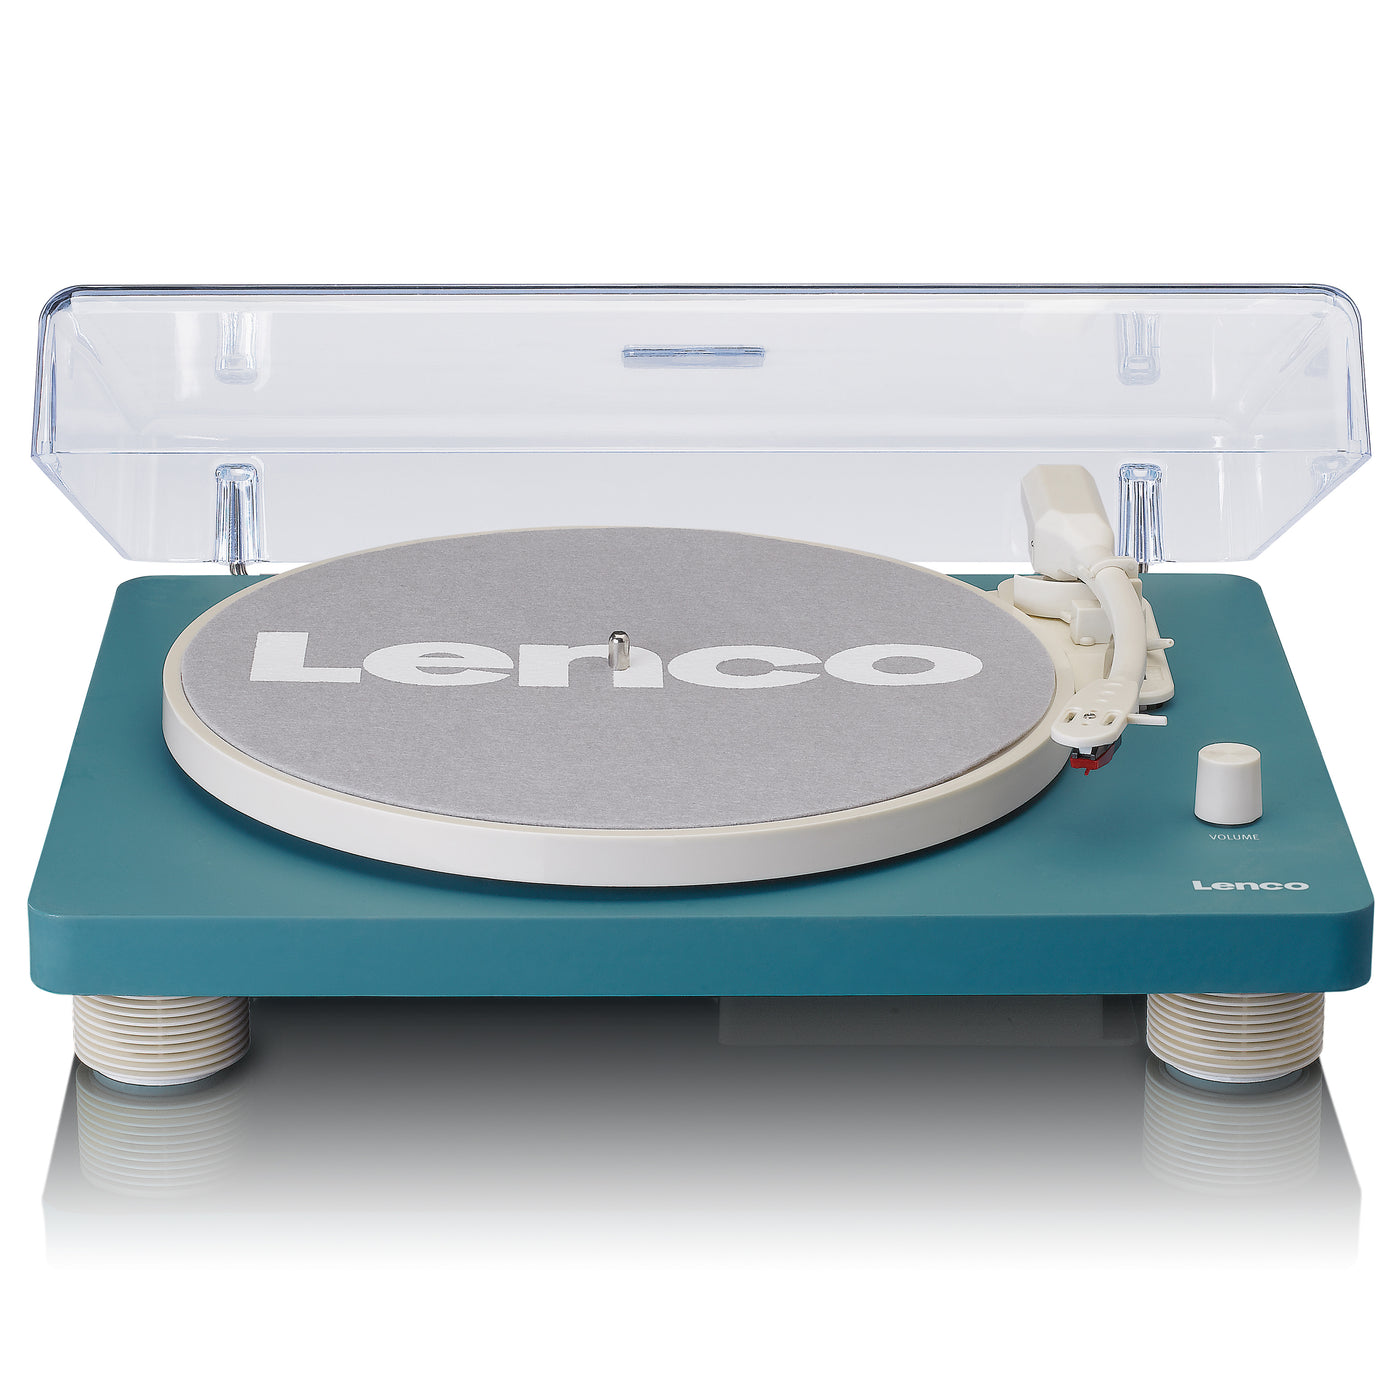 LENCO LS-50TQ - Record Player with built-in speakers USB Encoding - Turquoise